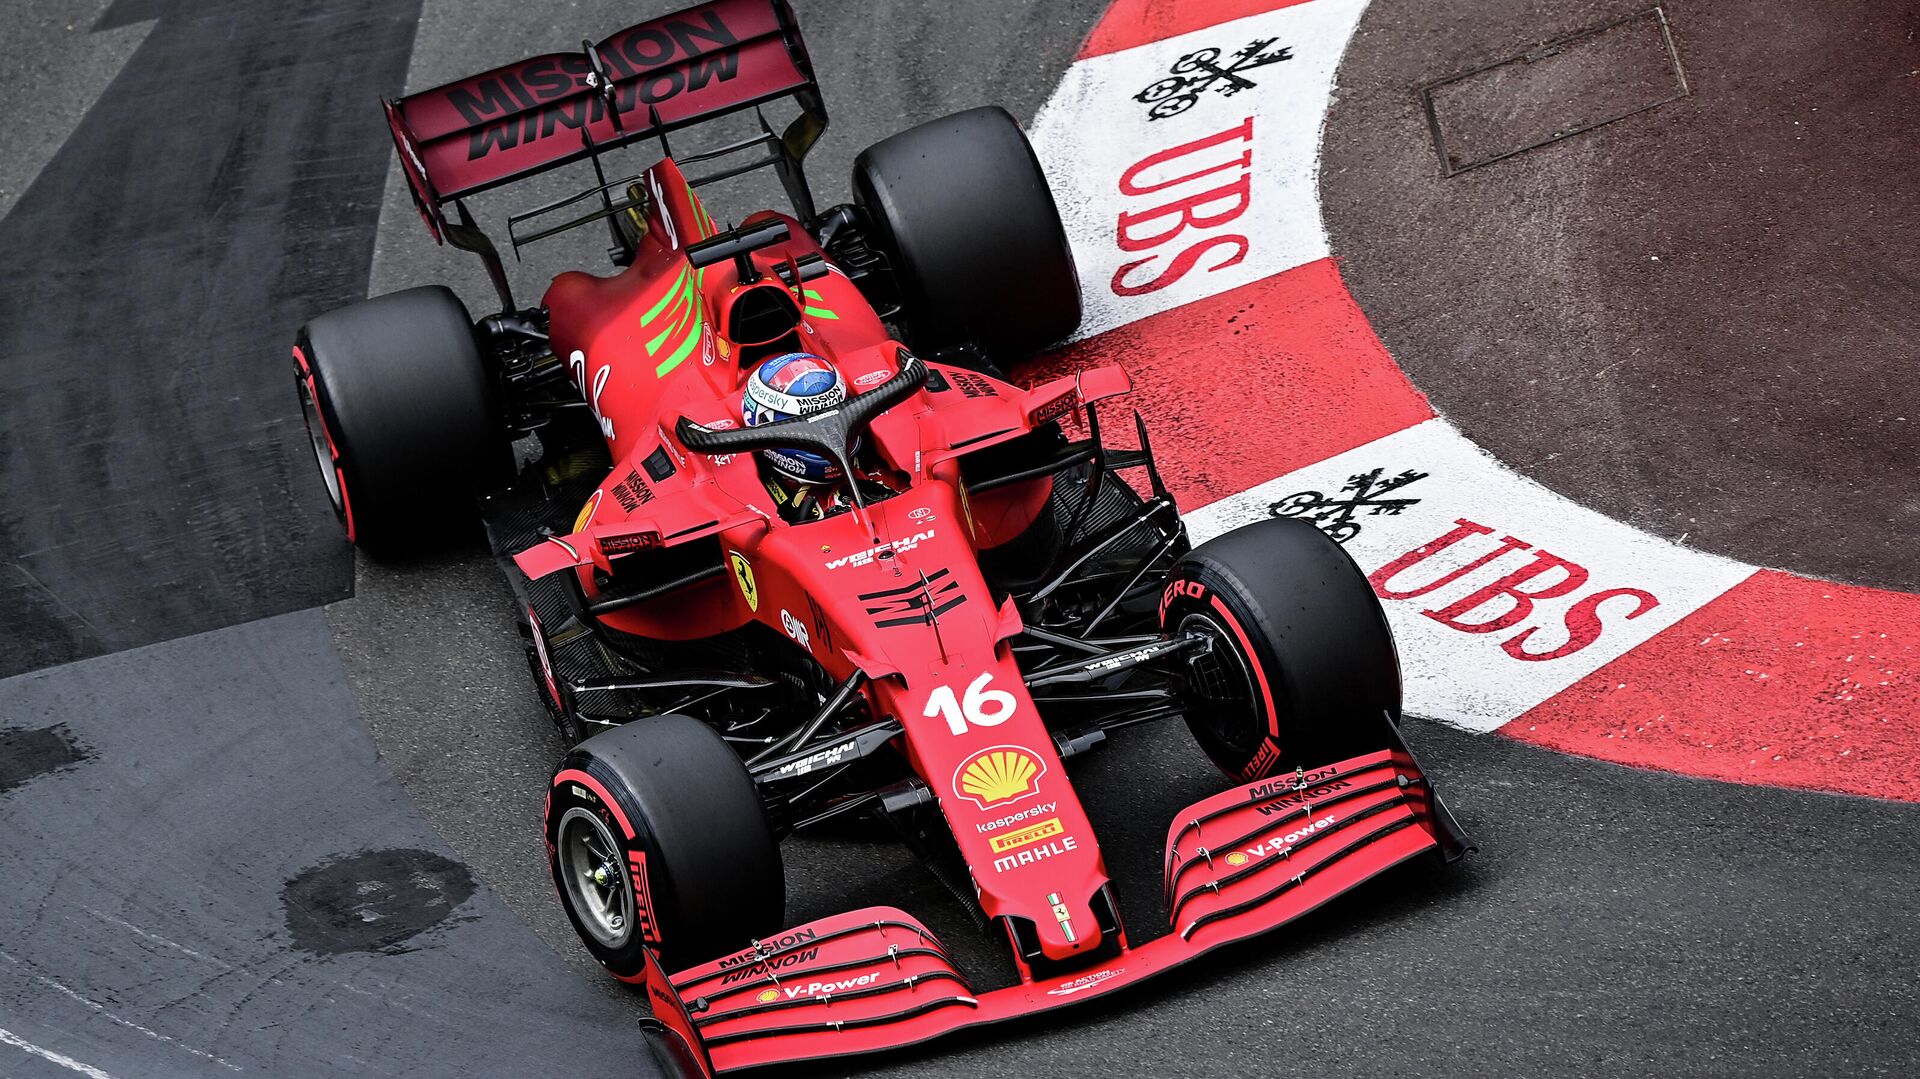 Ferrari's Monegasque driver Charles Leclerc drives during the third practice session at the Monaco street circuit in Monaco, on May 22, 2021, ahead of the Monaco Formula 1 Grand Prix. (Photo by ANDREJ ISAKOVIC / AFP) - РИА Новости, 1920, 22.05.2021